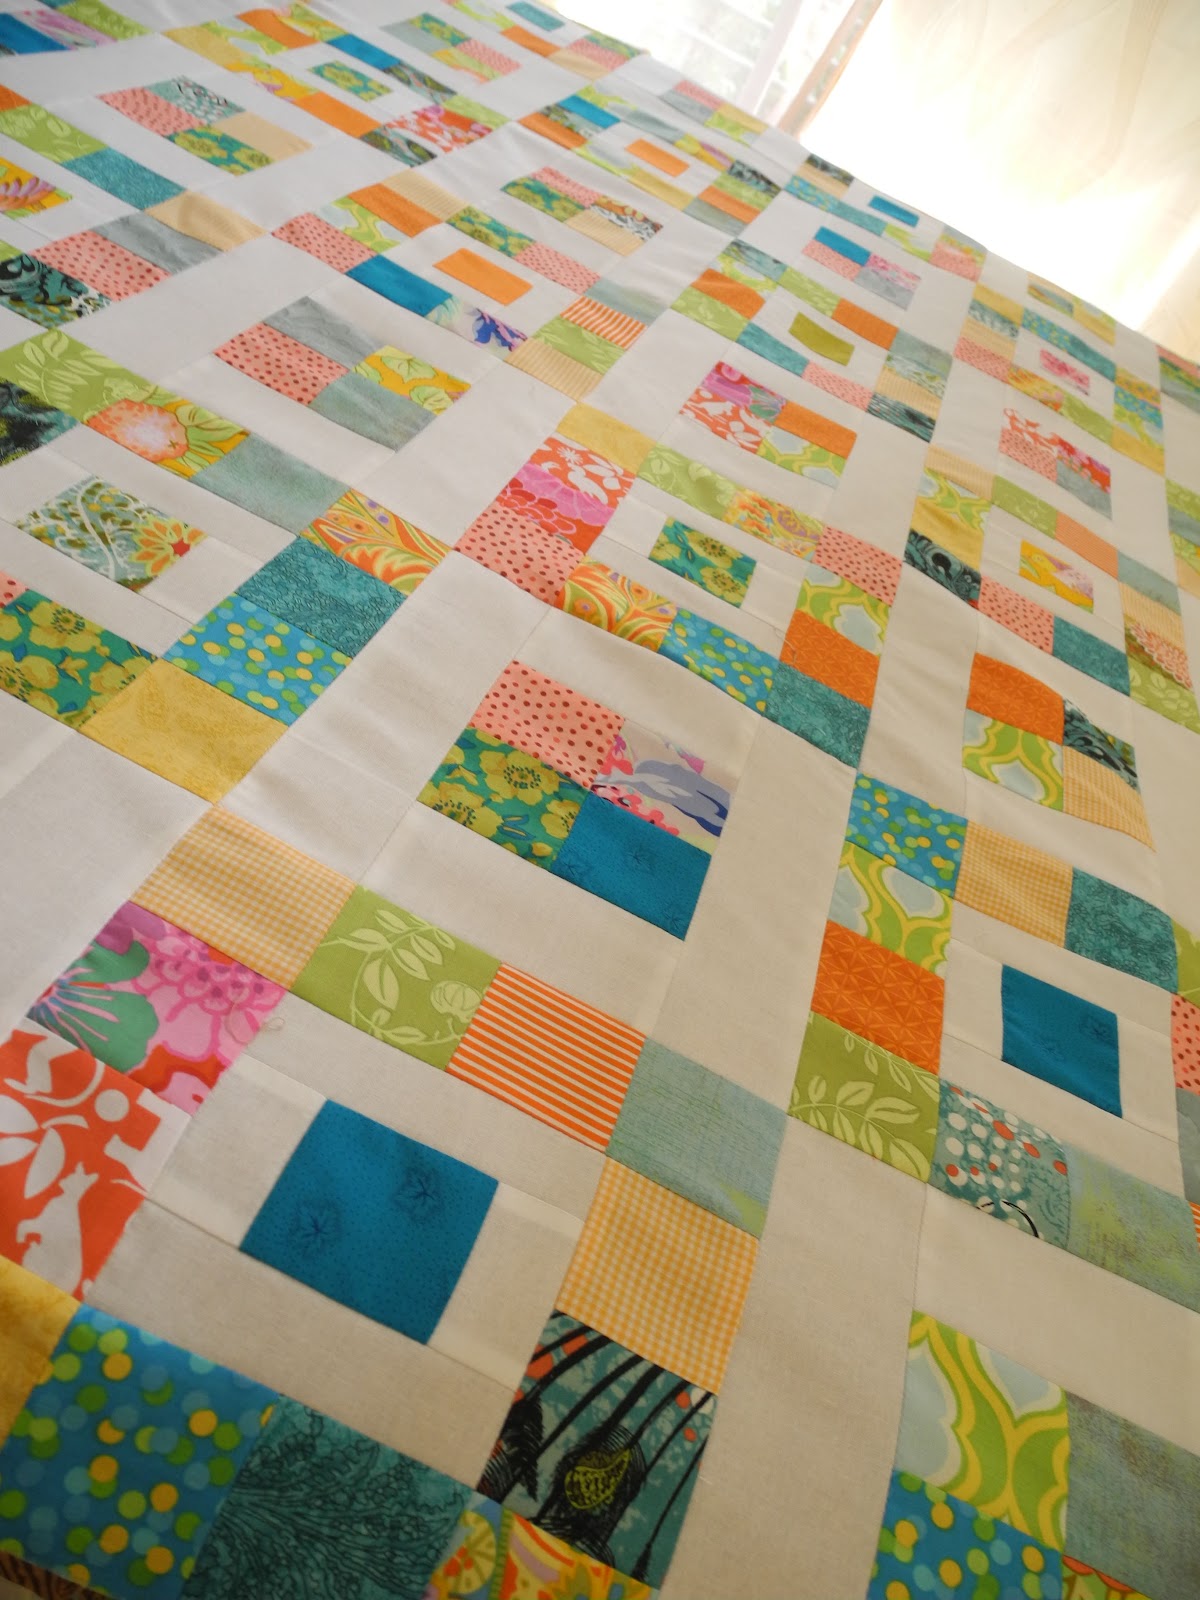 Stitch One Quilt Too: Tutorial - sewing blocks together in onesys ...